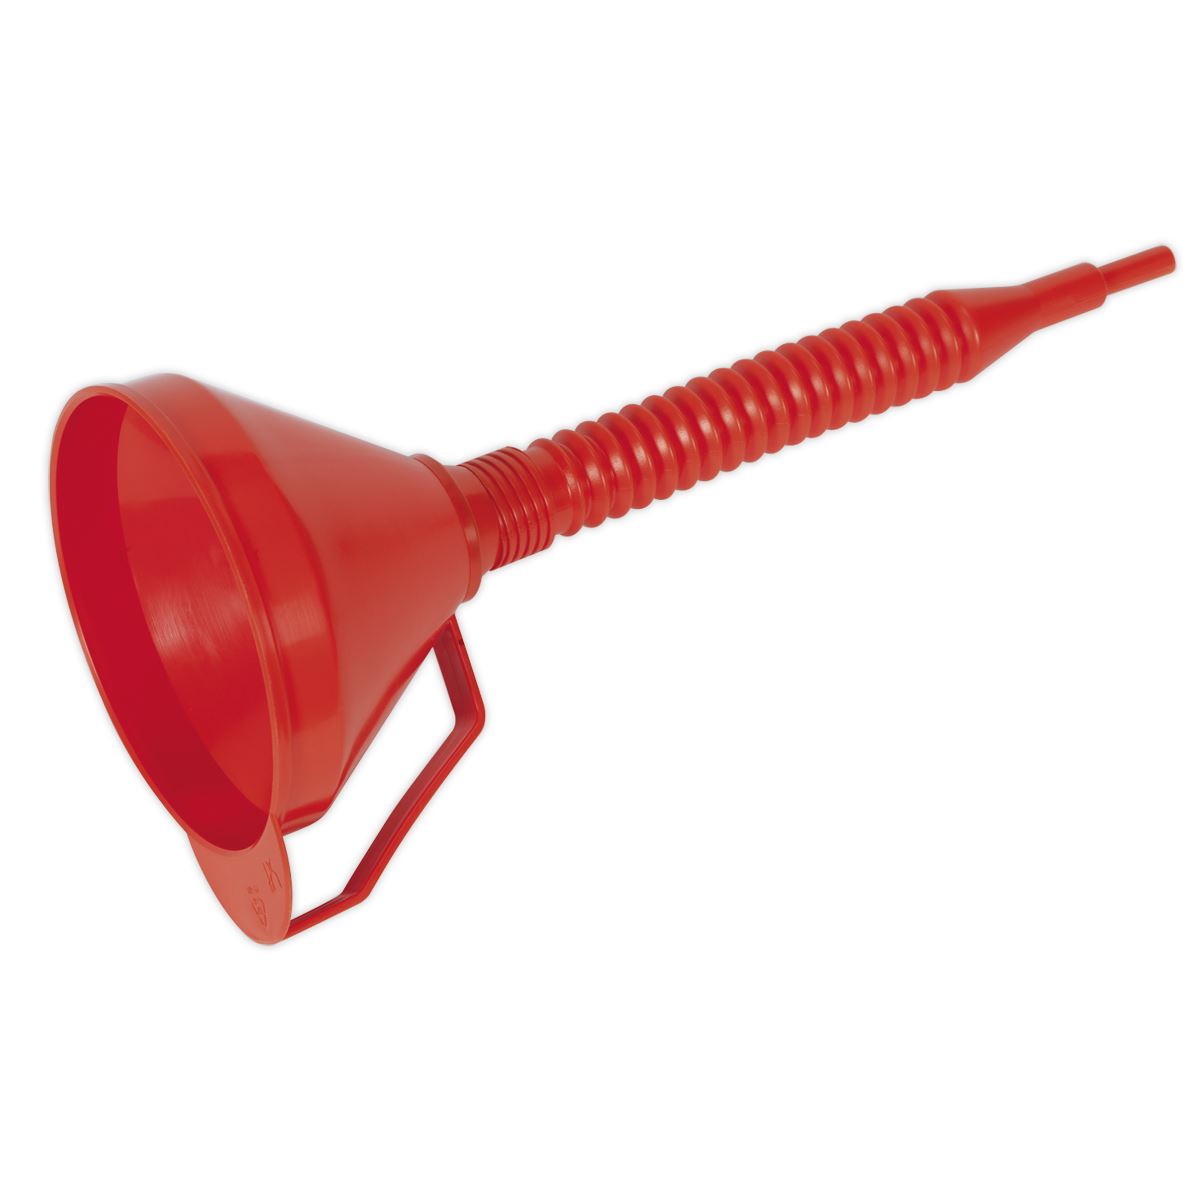 Sealey Funnel with Flexible Spout & Filter Medium Ø160mm